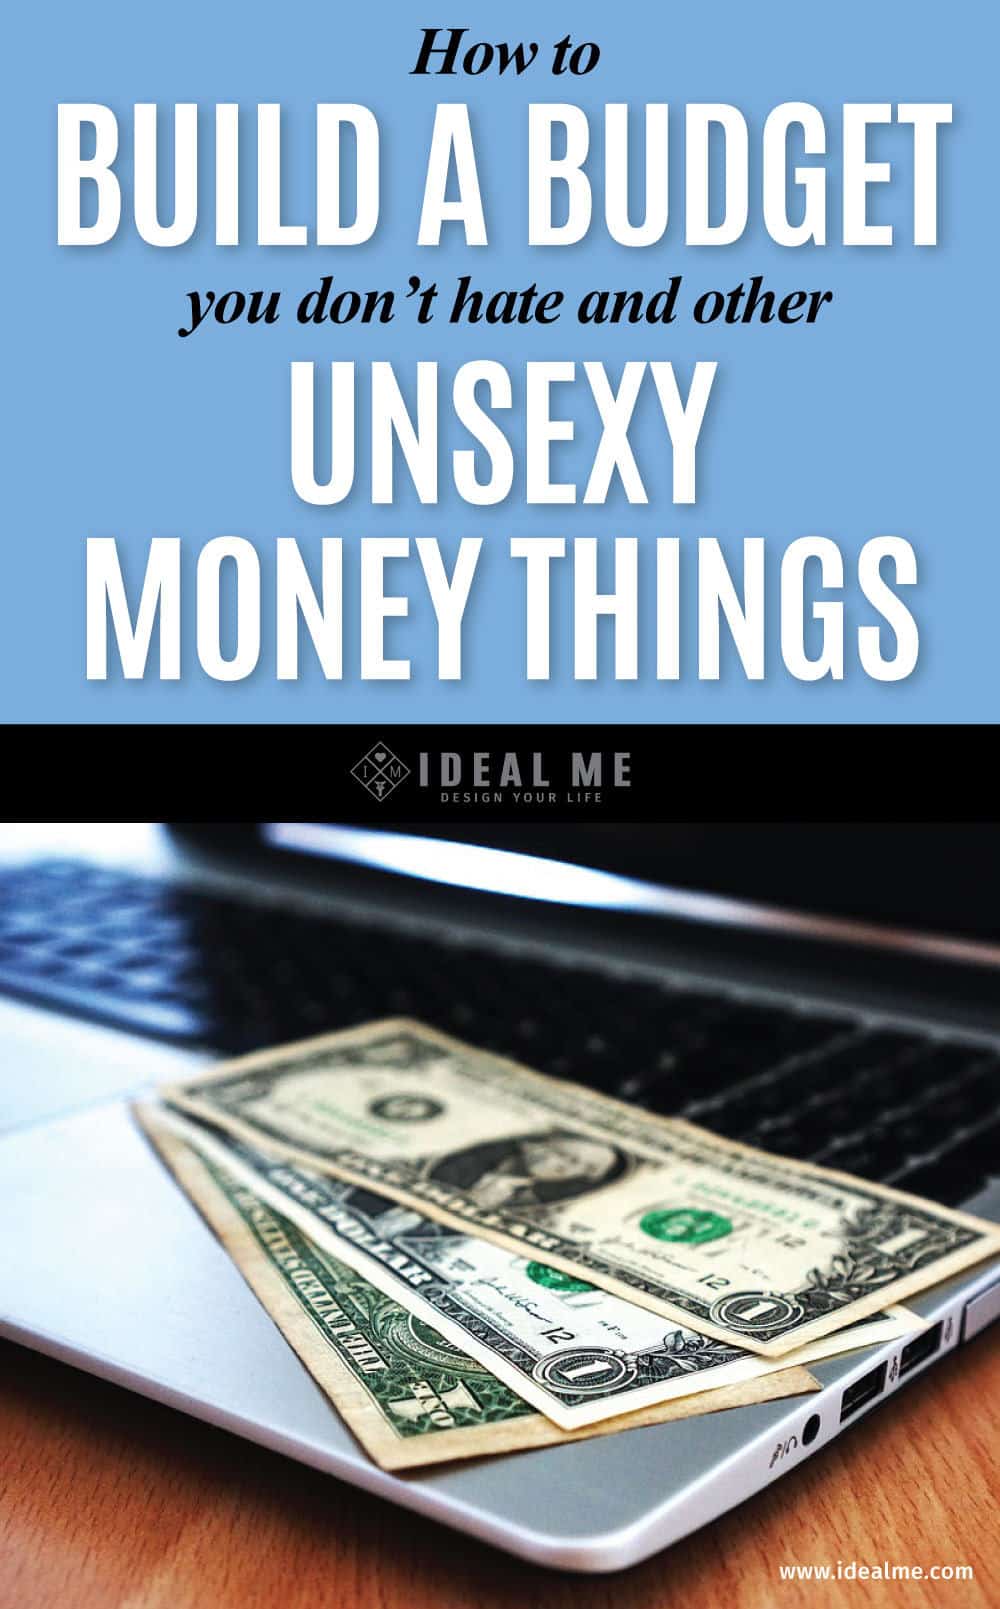 How To Build a Budget You Don't Hate & Other Unsexy Money Things - Knowing what’s coming in and going out is the first step to reaching financial freedom. From building budget categories to tracking your spending, our post will guide you through building a sustainable budget in just 6 easy steps.